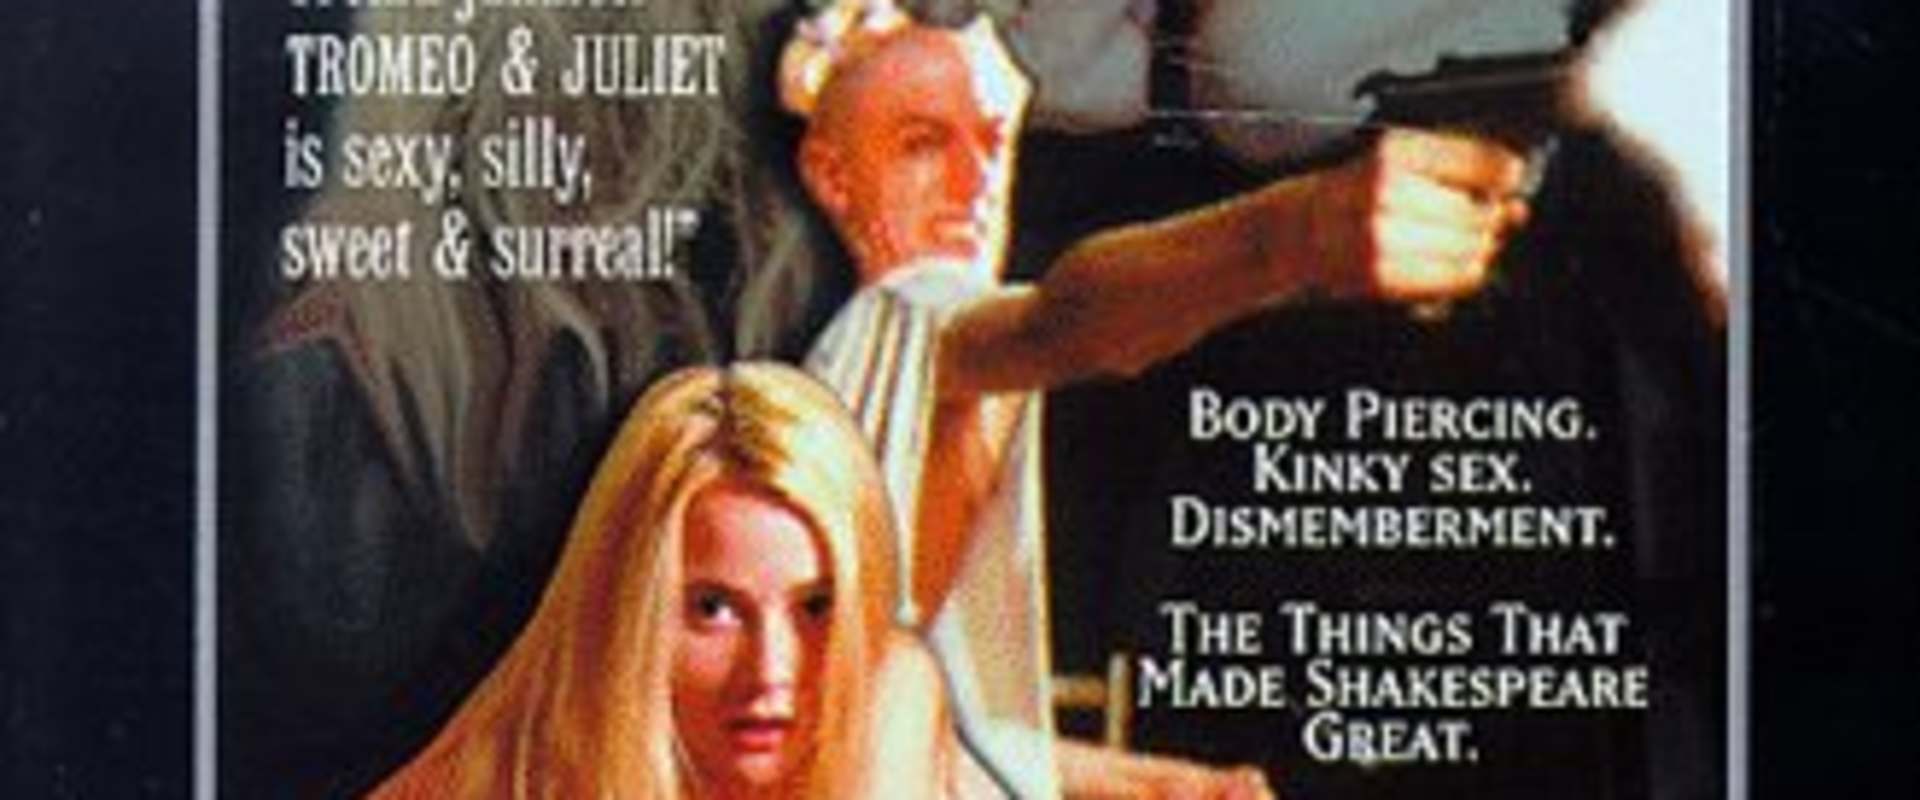 where to watch tromeo and juliet